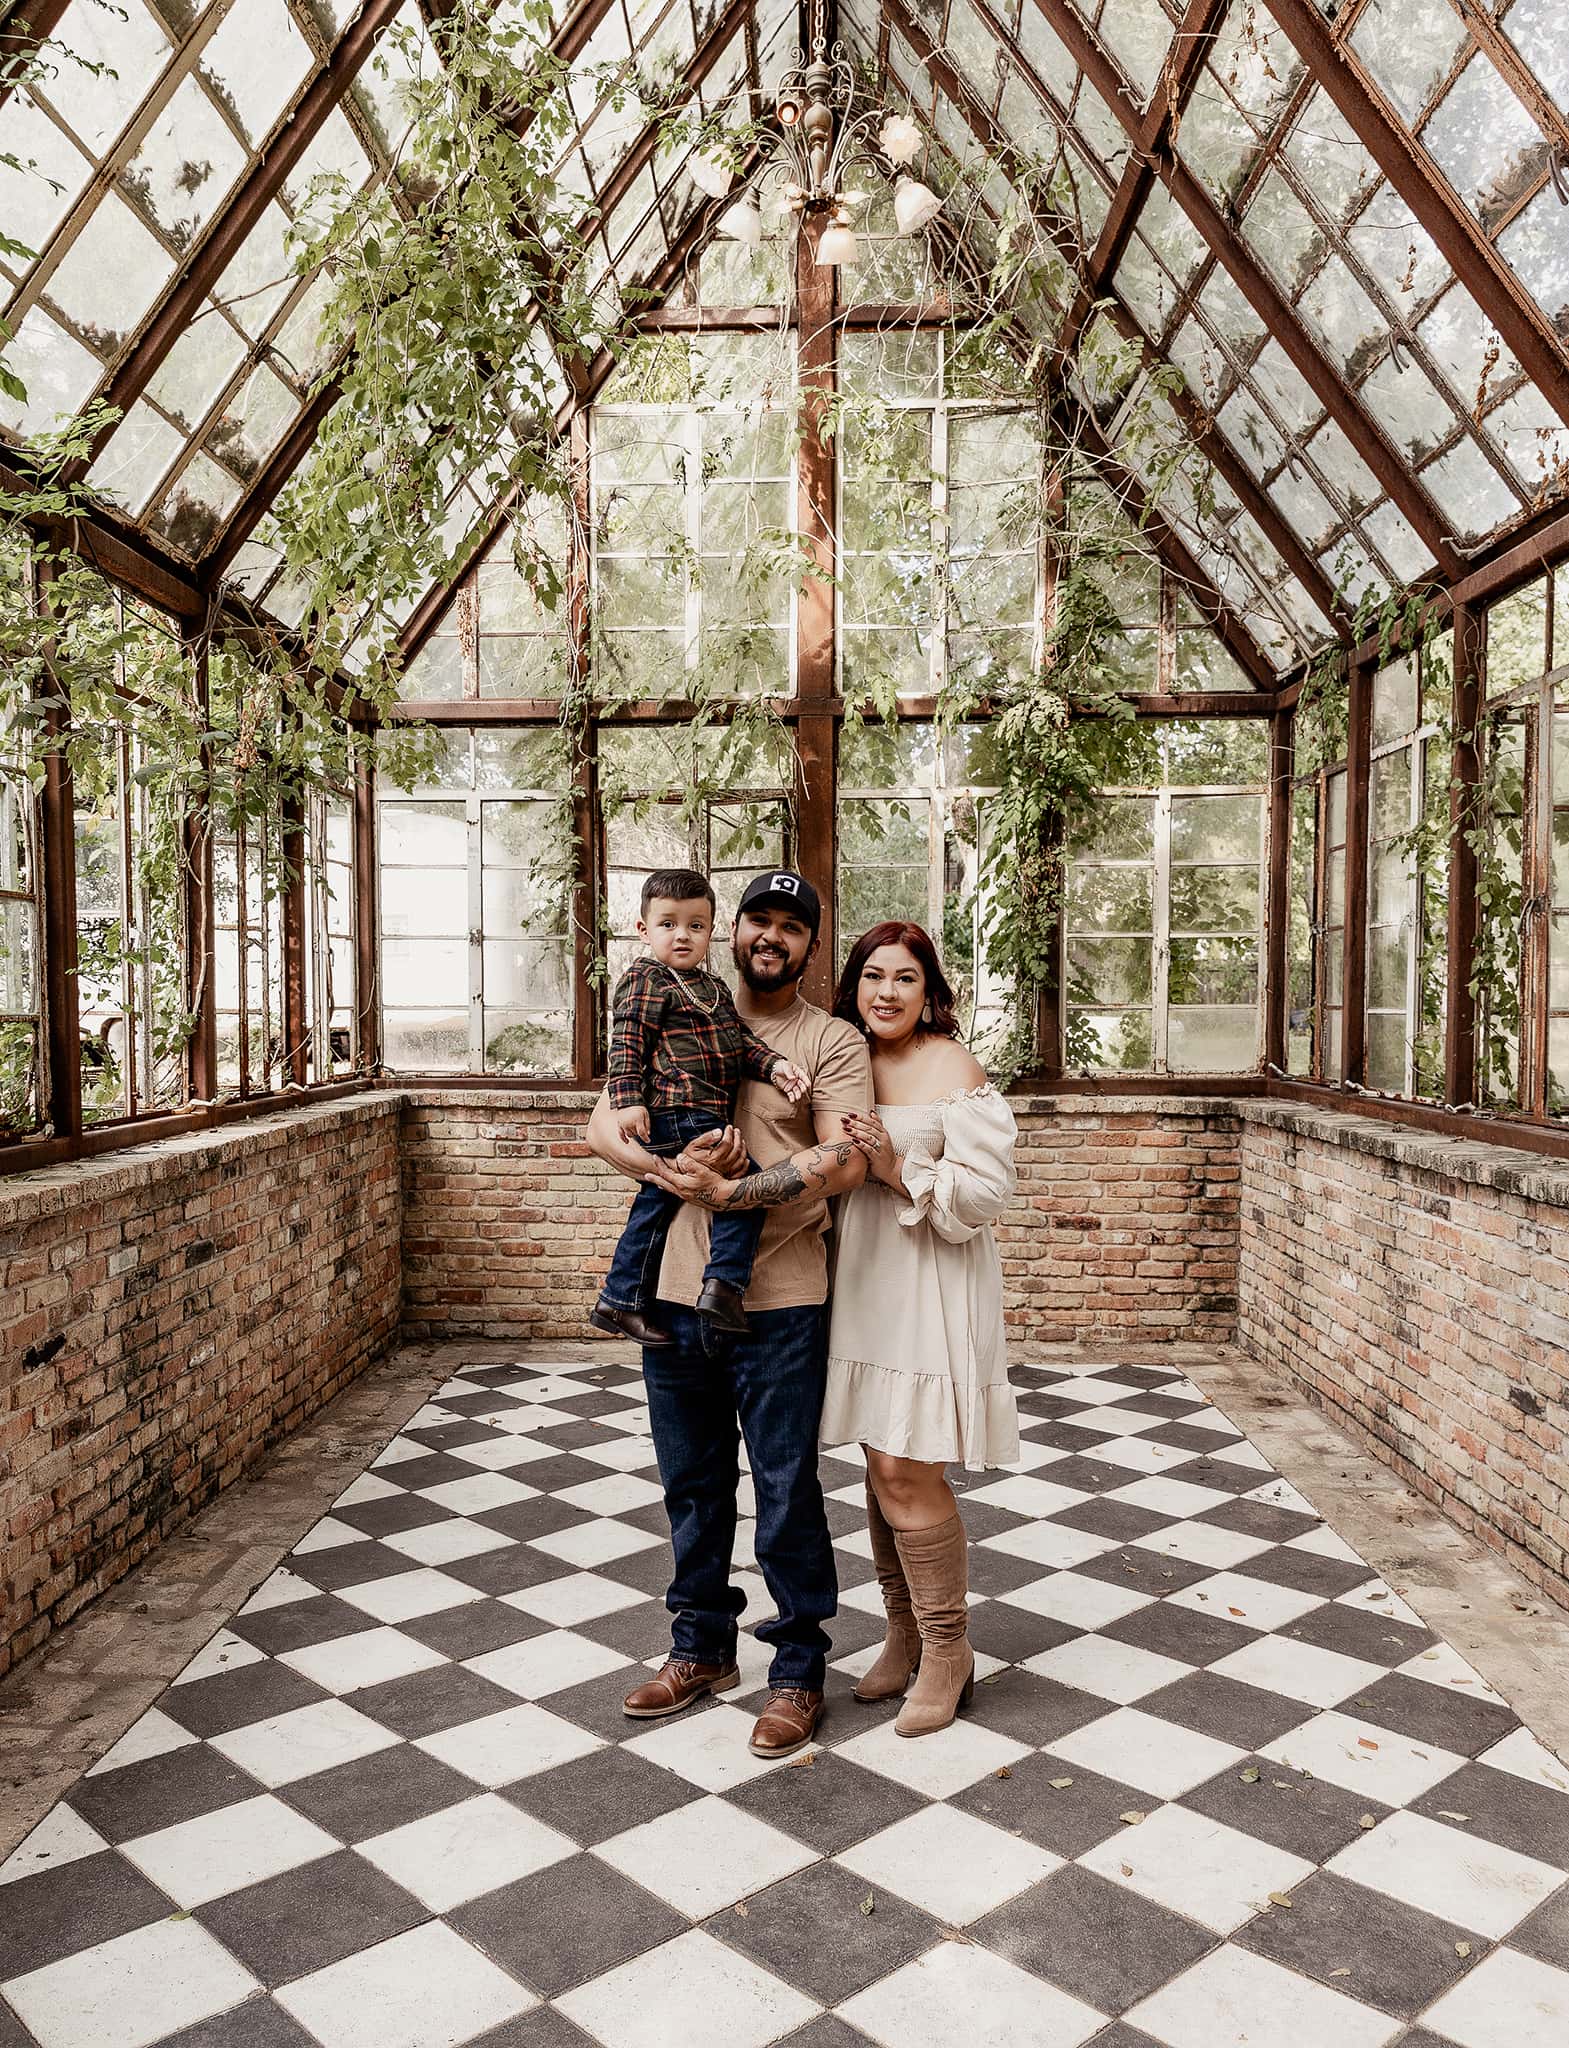 Family portrait at a beautiful greenhouse in Austin, Texas.